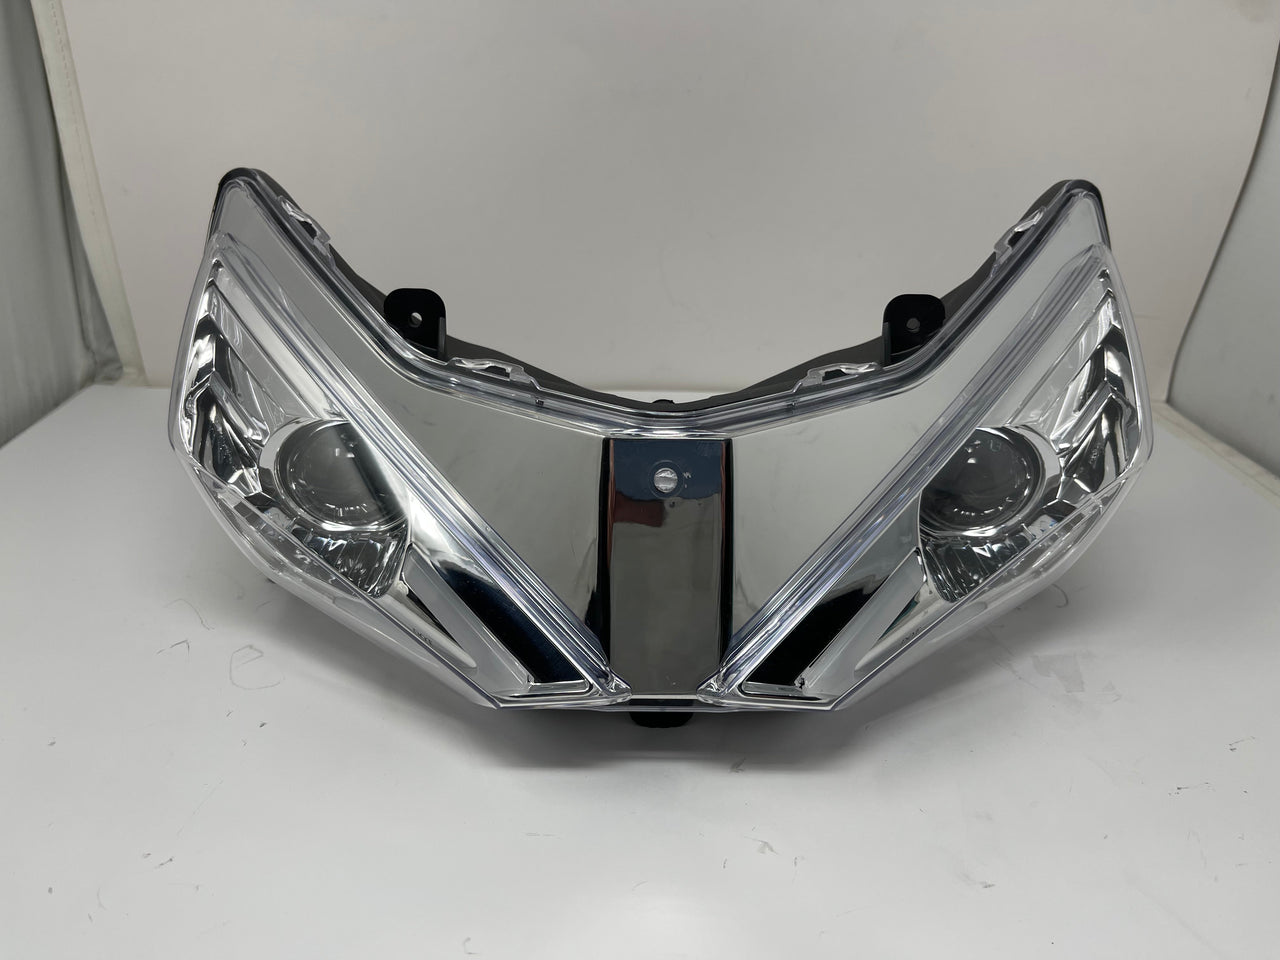 X22R MAX 250cc Motorcycle | Headlight Assembly (H6-70088)